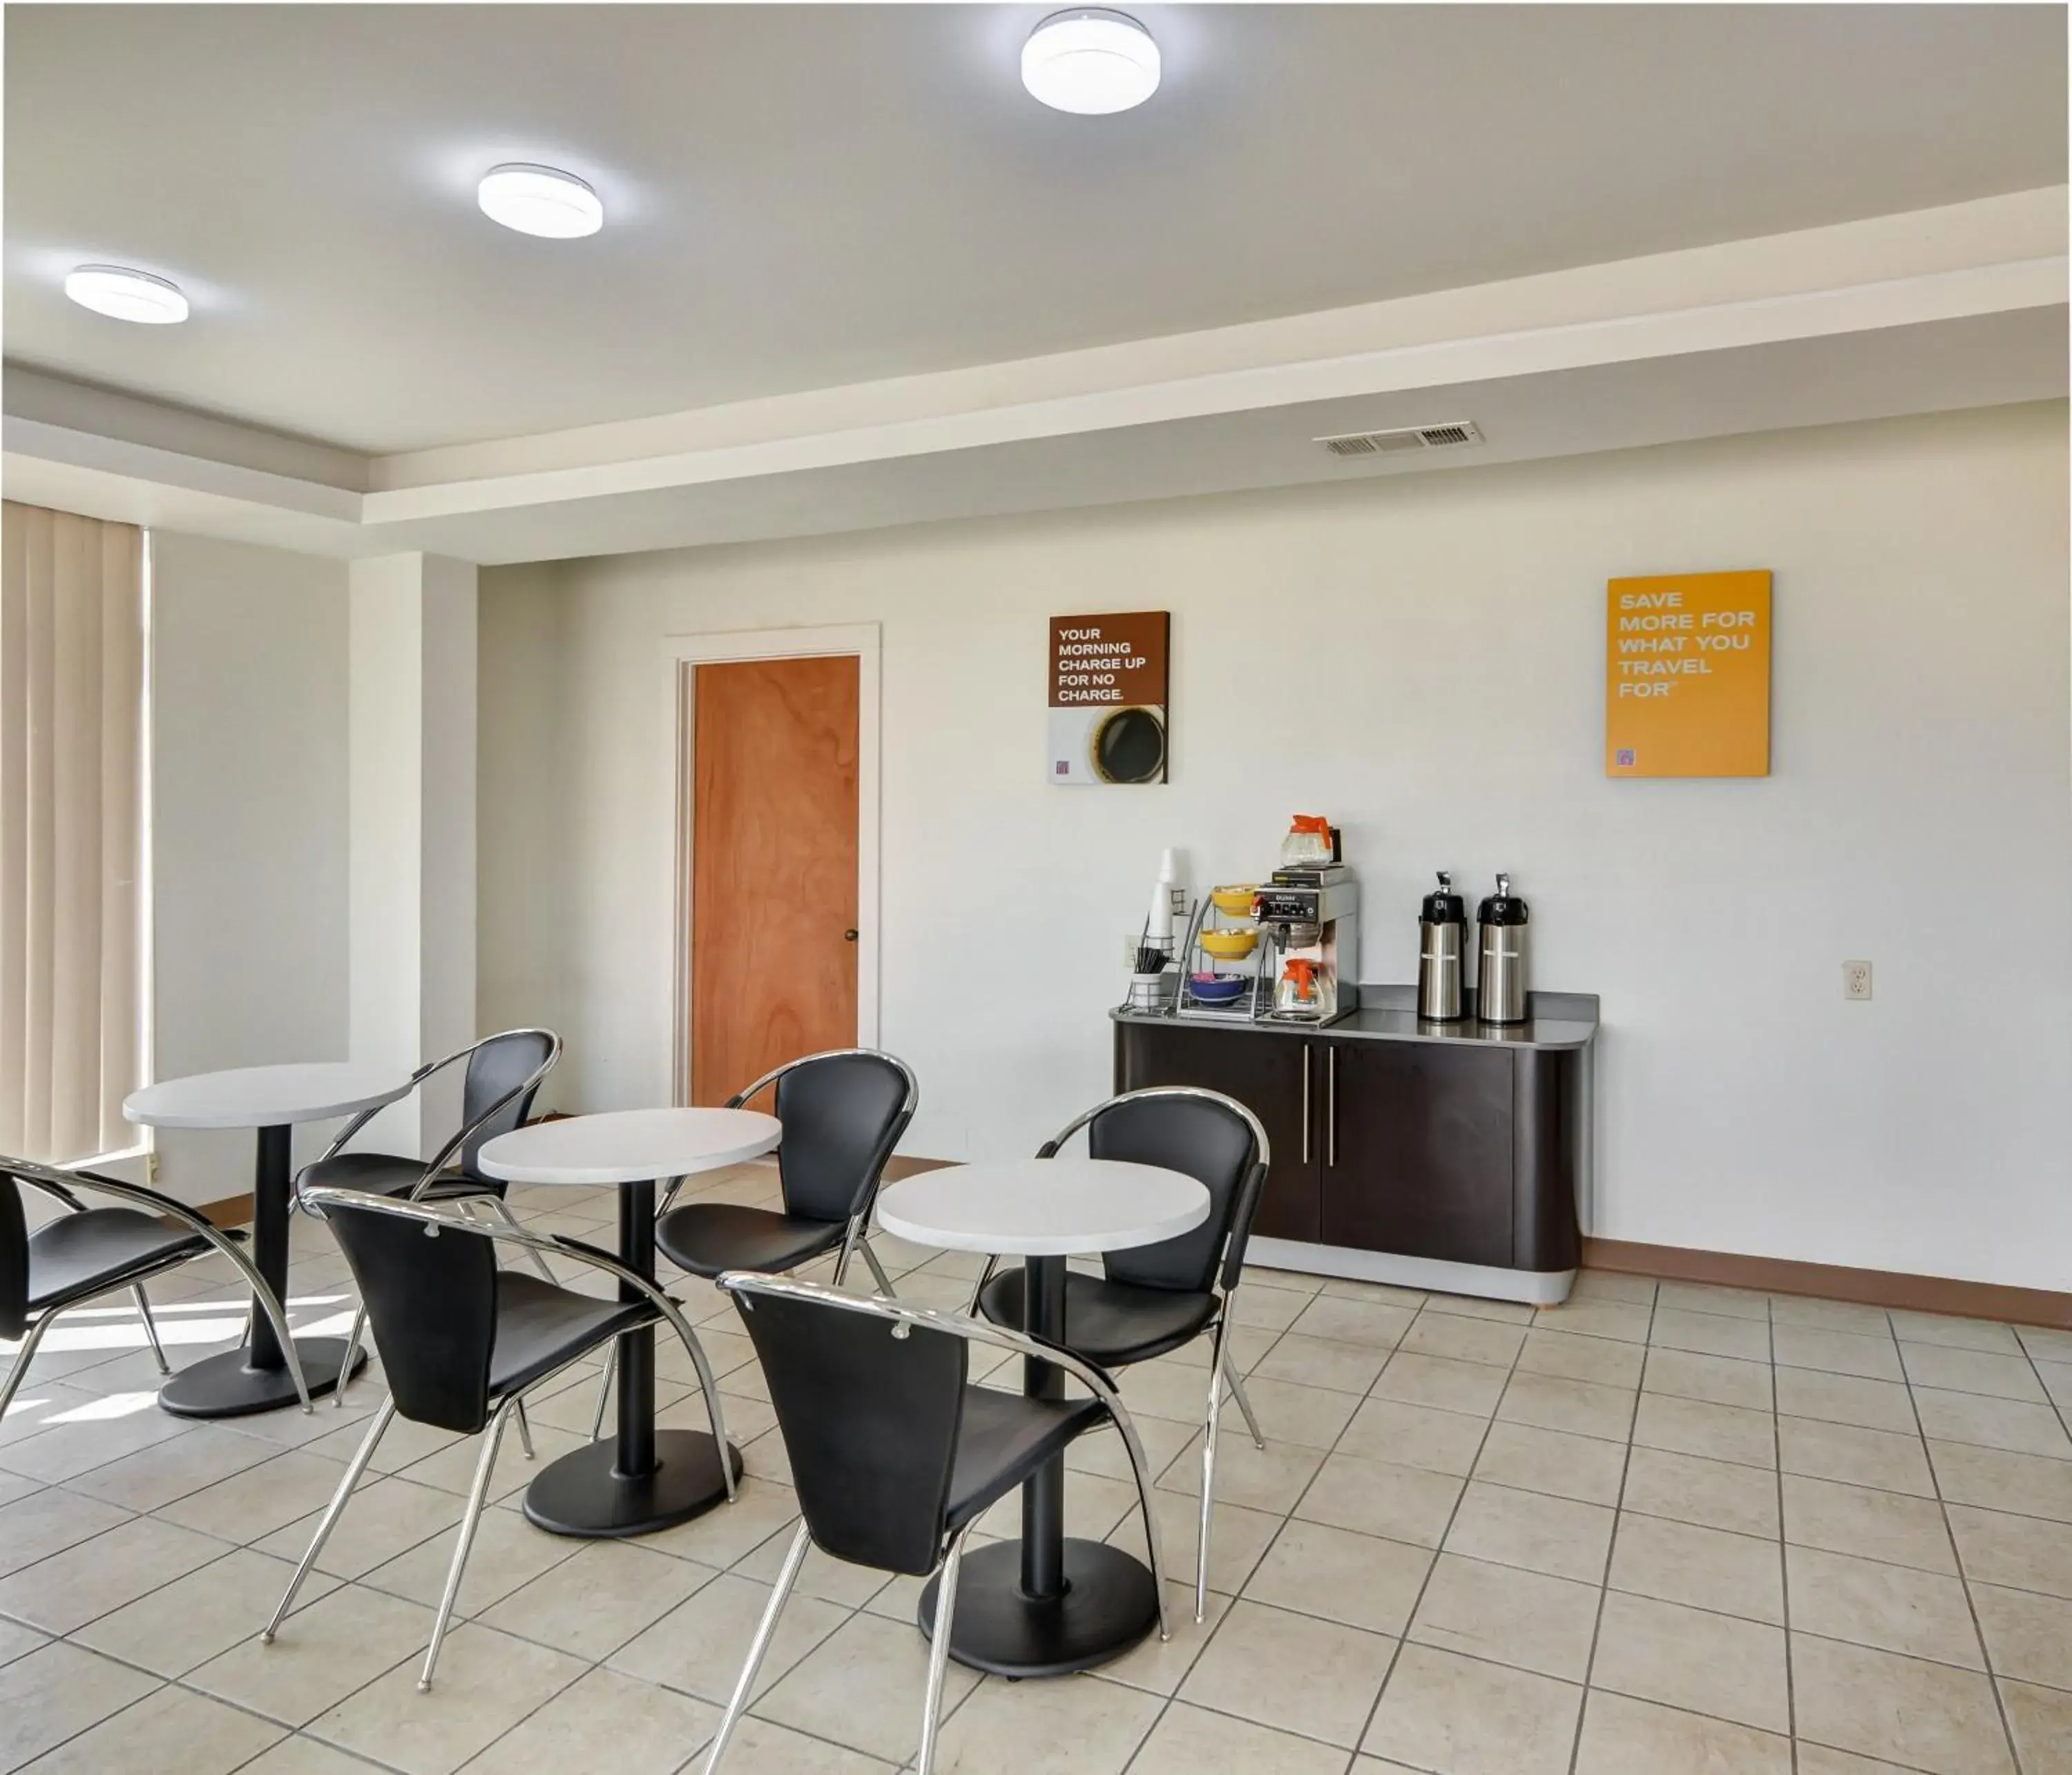 Lobby or reception in Motel 6-Lindale, TX